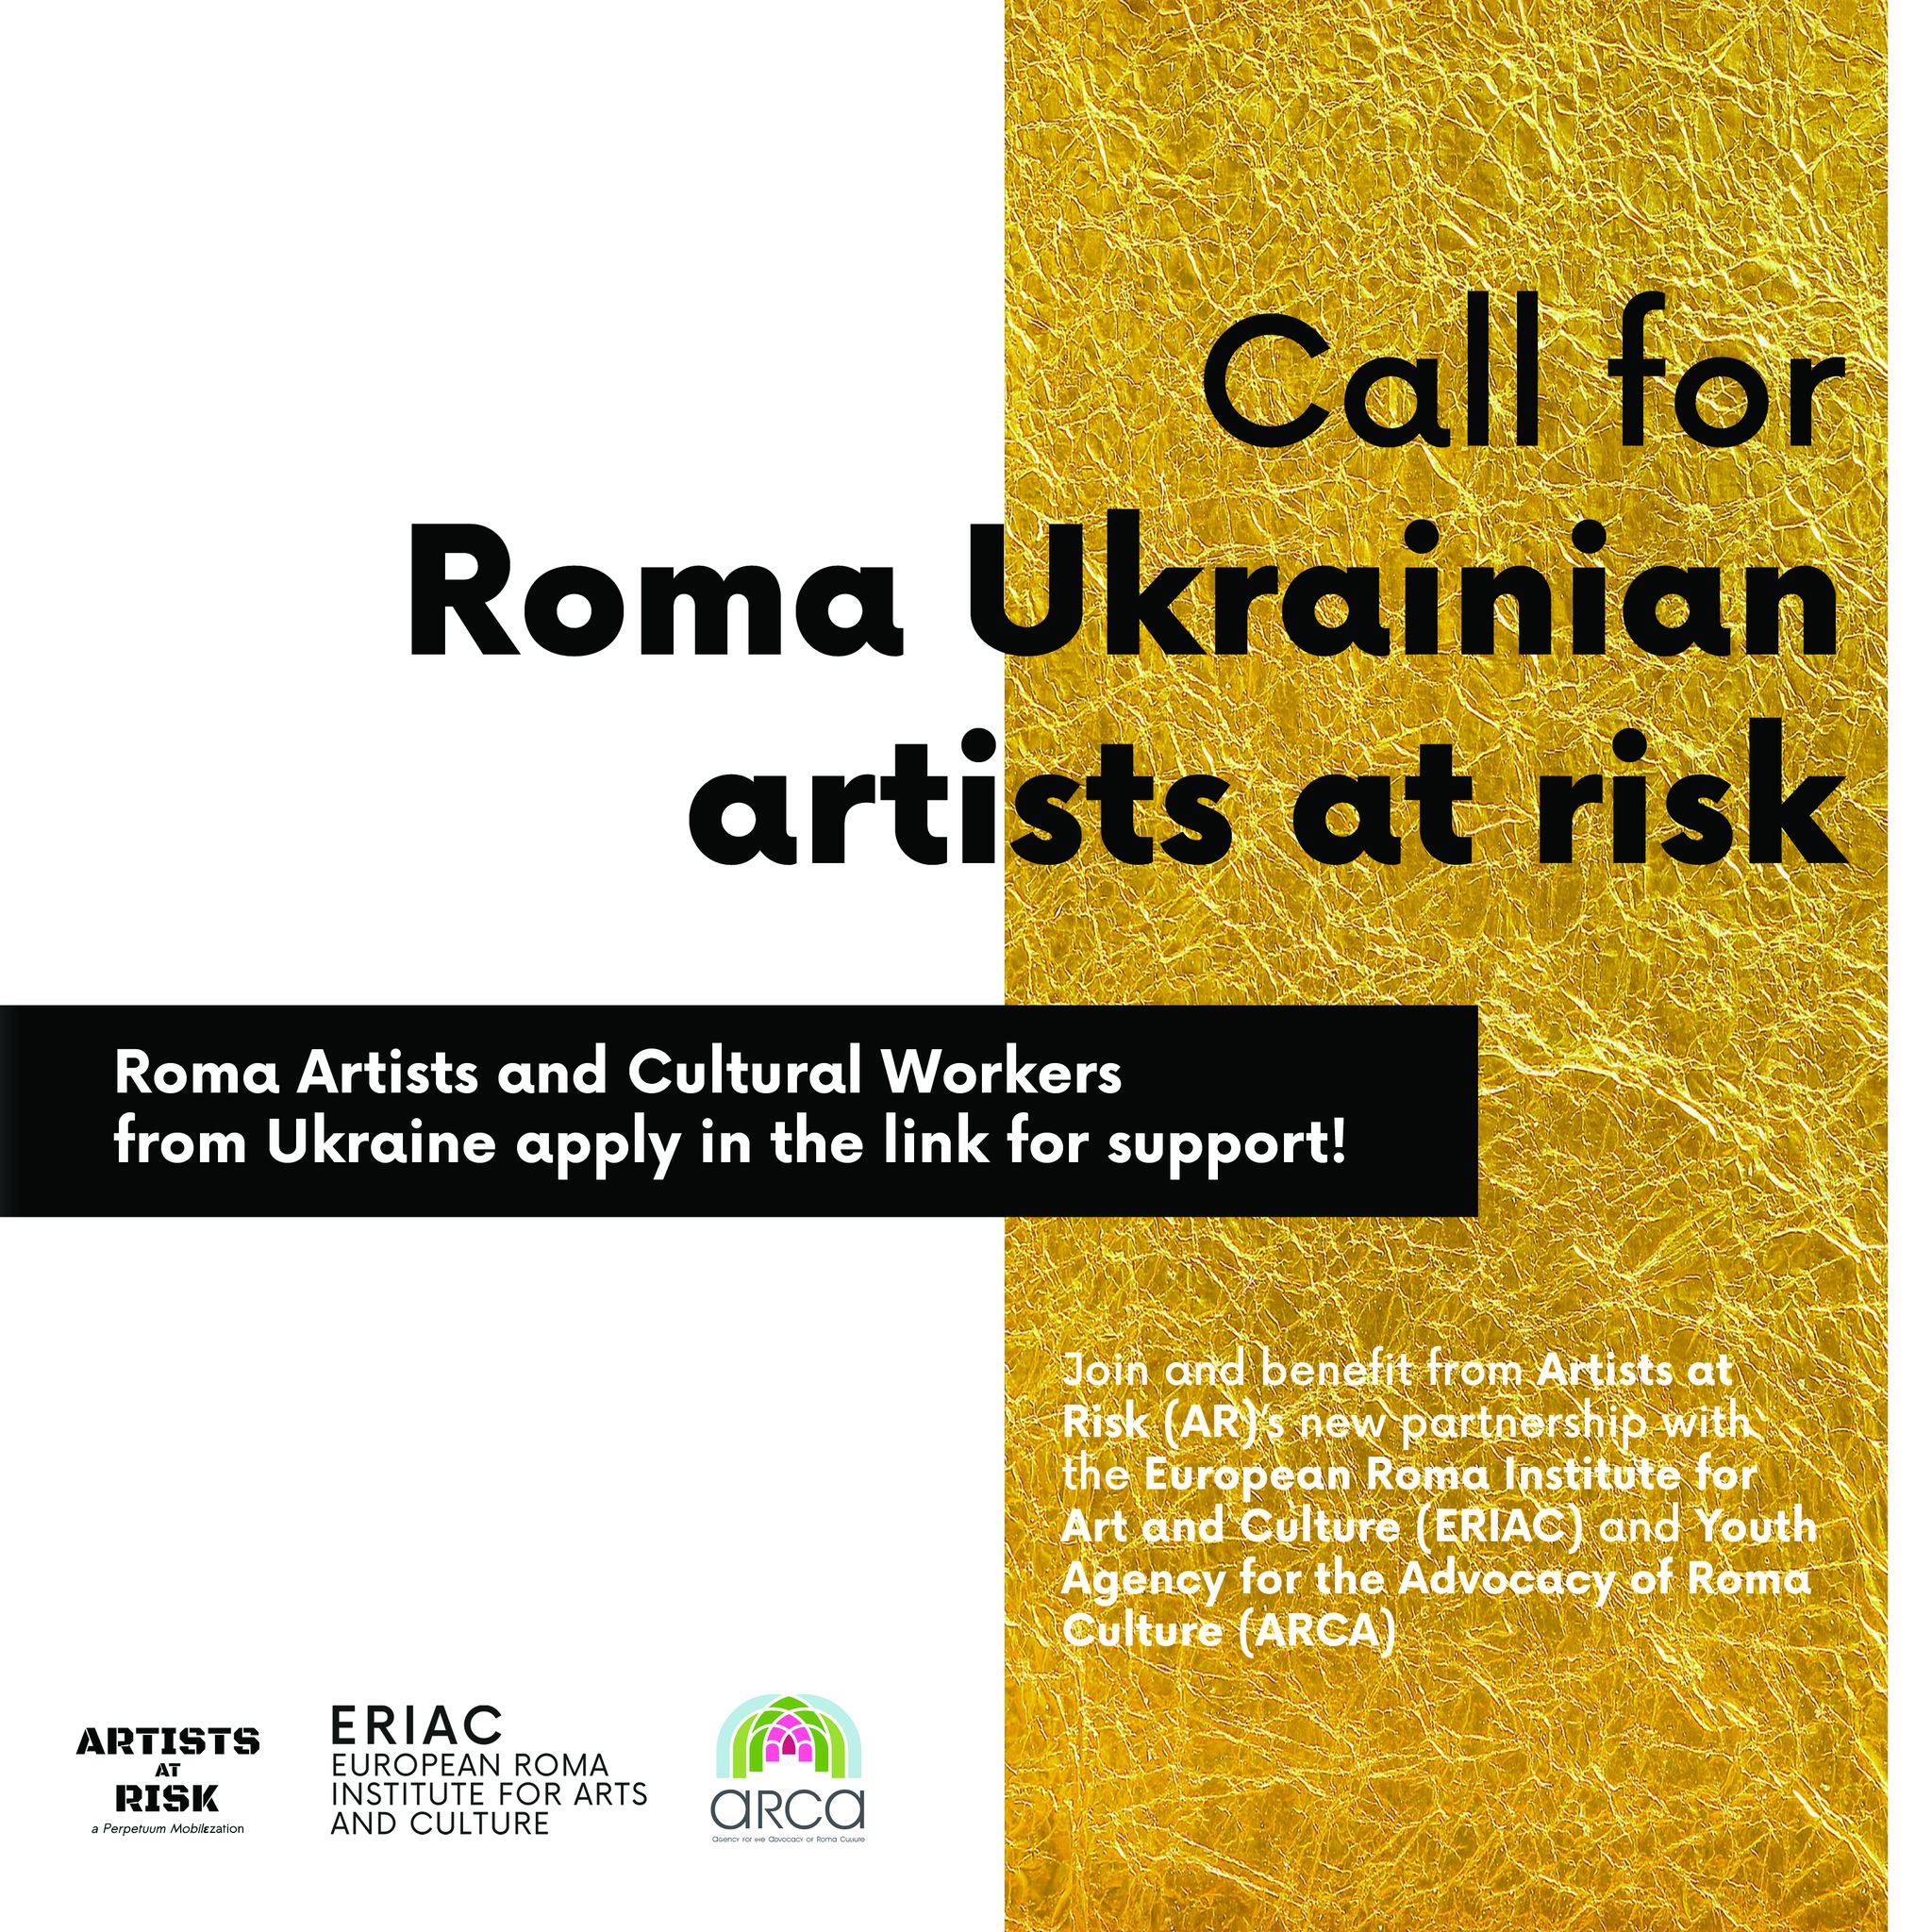 Call for Roma Ukrainian artists at risk